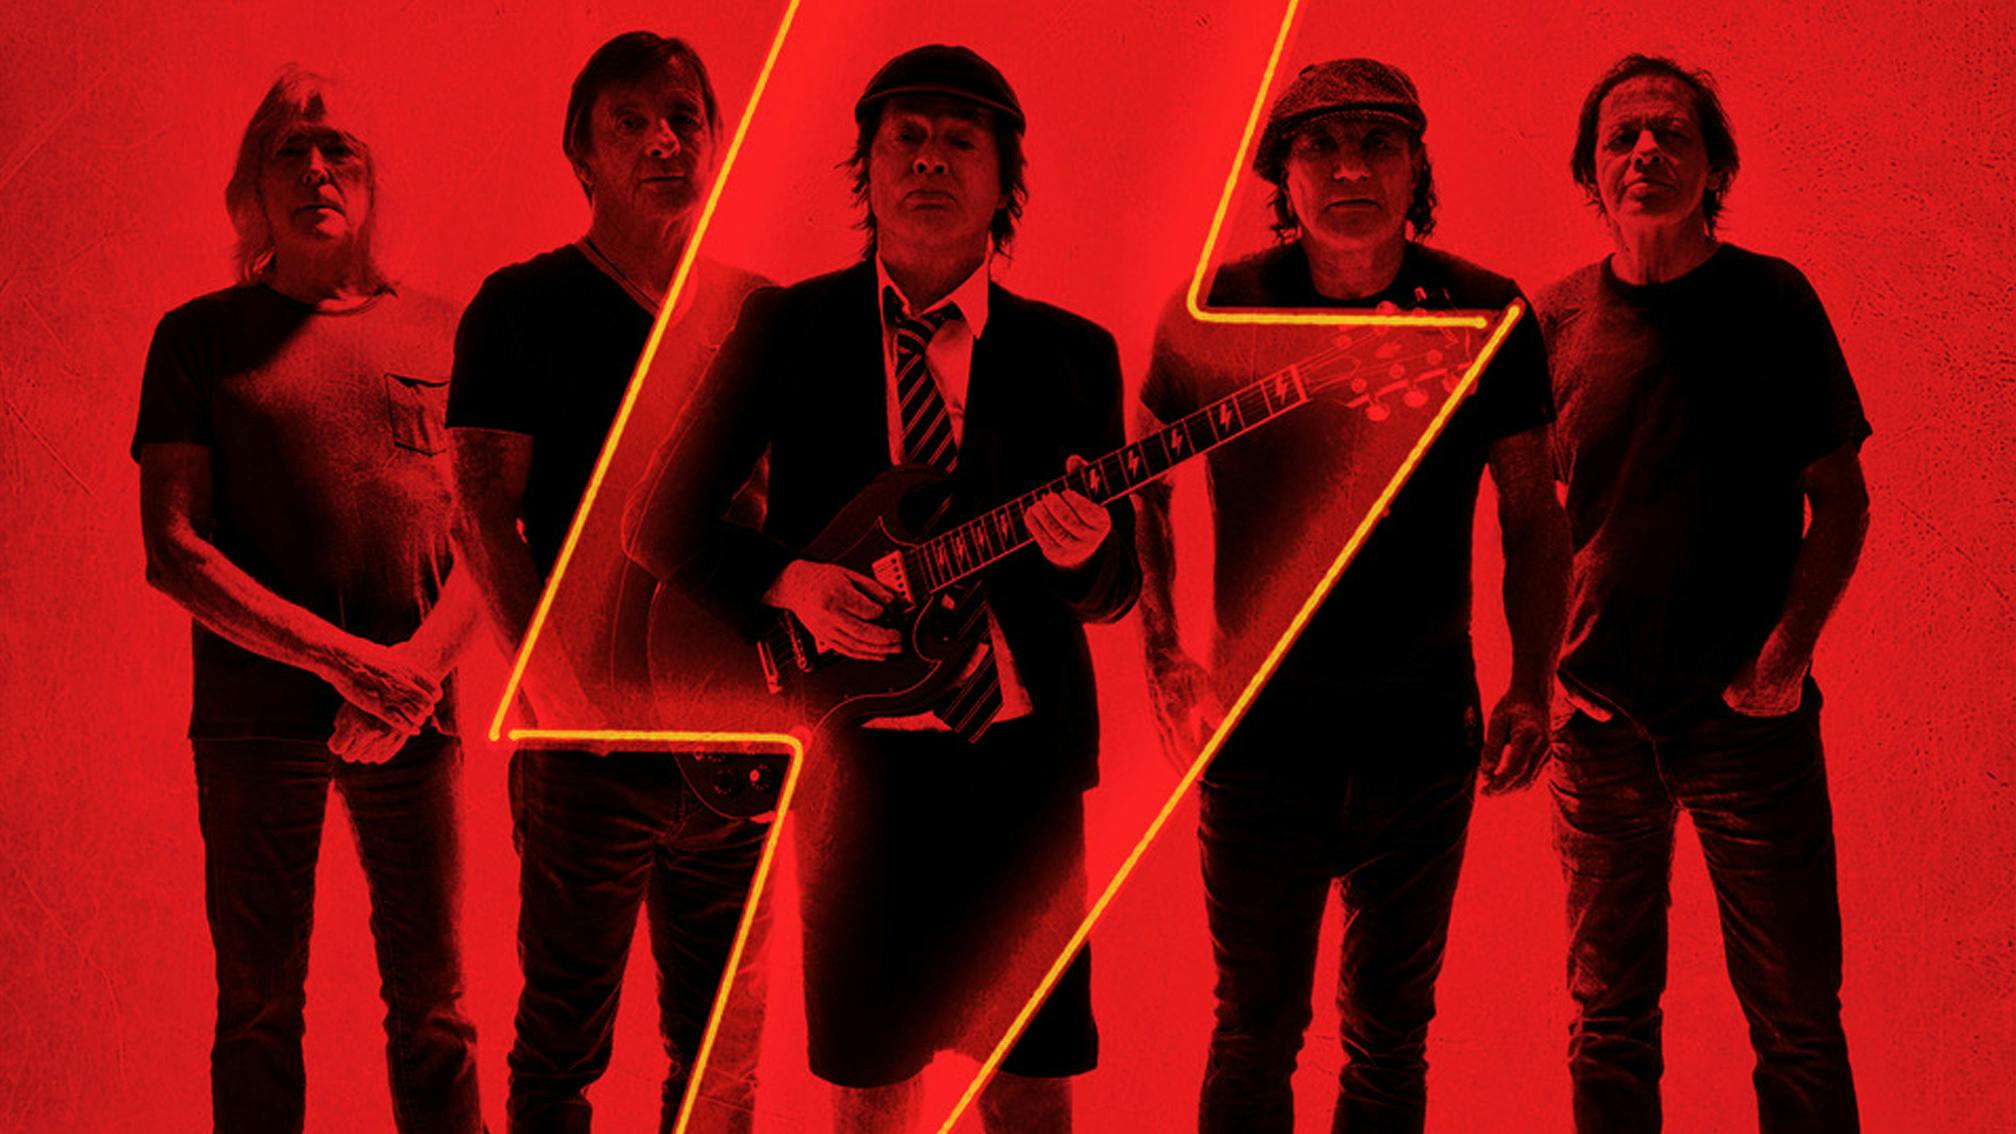 Angus Young On AC/DC's Consistent Sound: "This Is What We Do Best – We Make Rock'N'Roll"